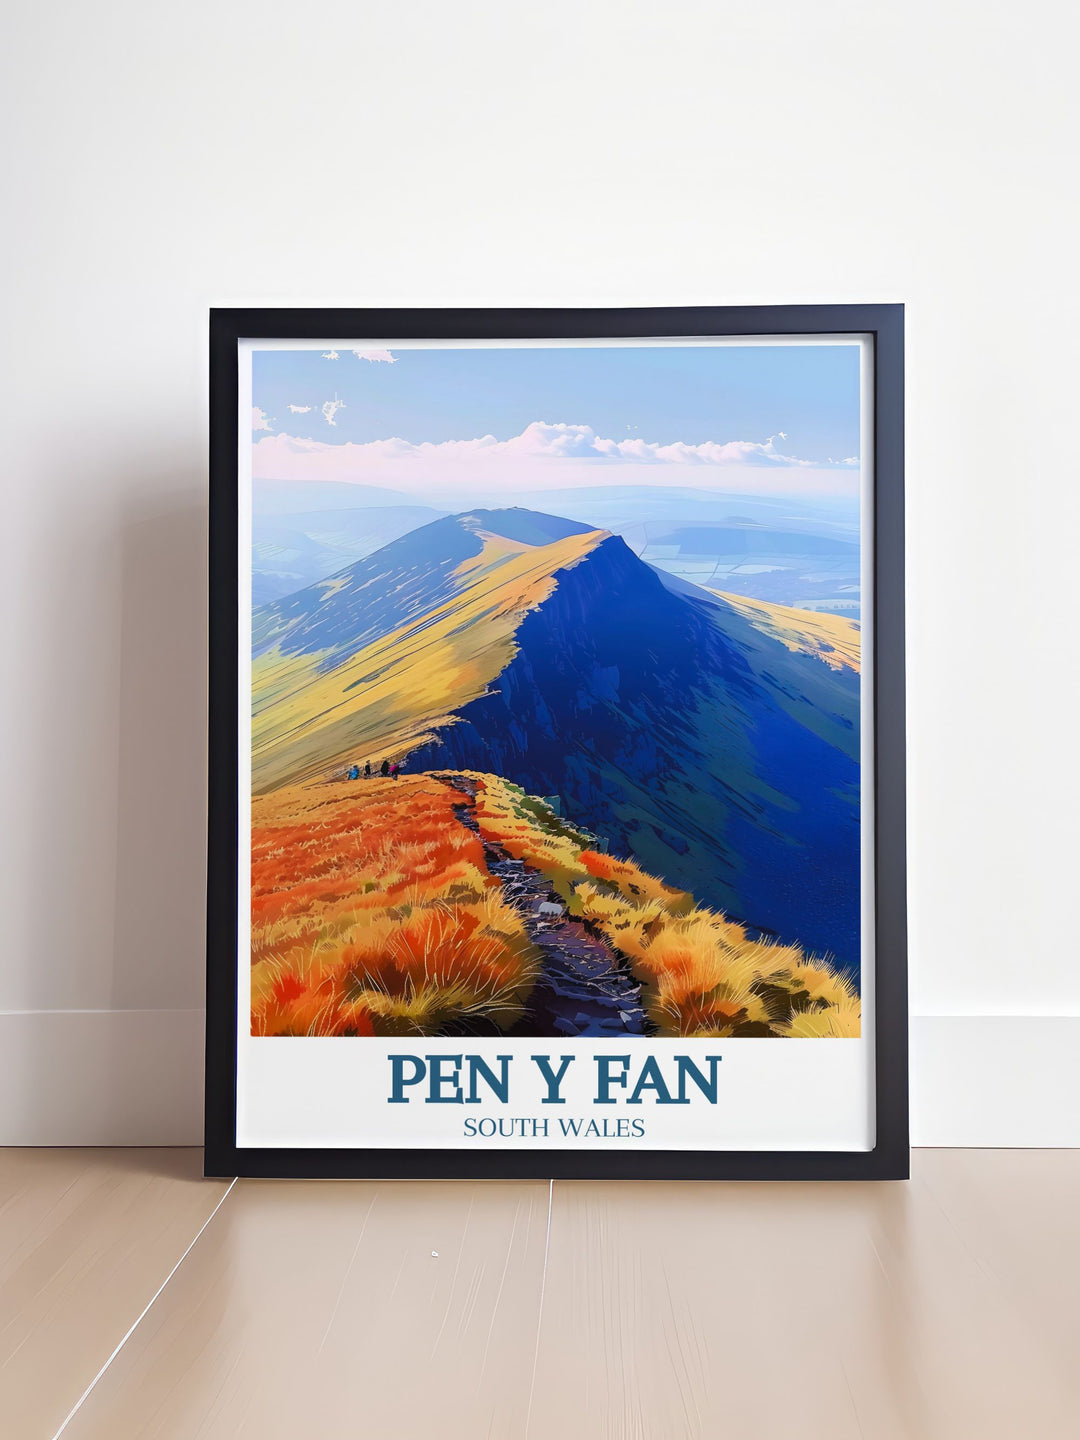 Beautiful Brecon Beacons Travel Poster featuring the iconic Pen Y Fan Mountain. This South Wales art print is ideal for those who appreciate natural landscapes and want to enhance their home with a piece of the Welsh countryside.